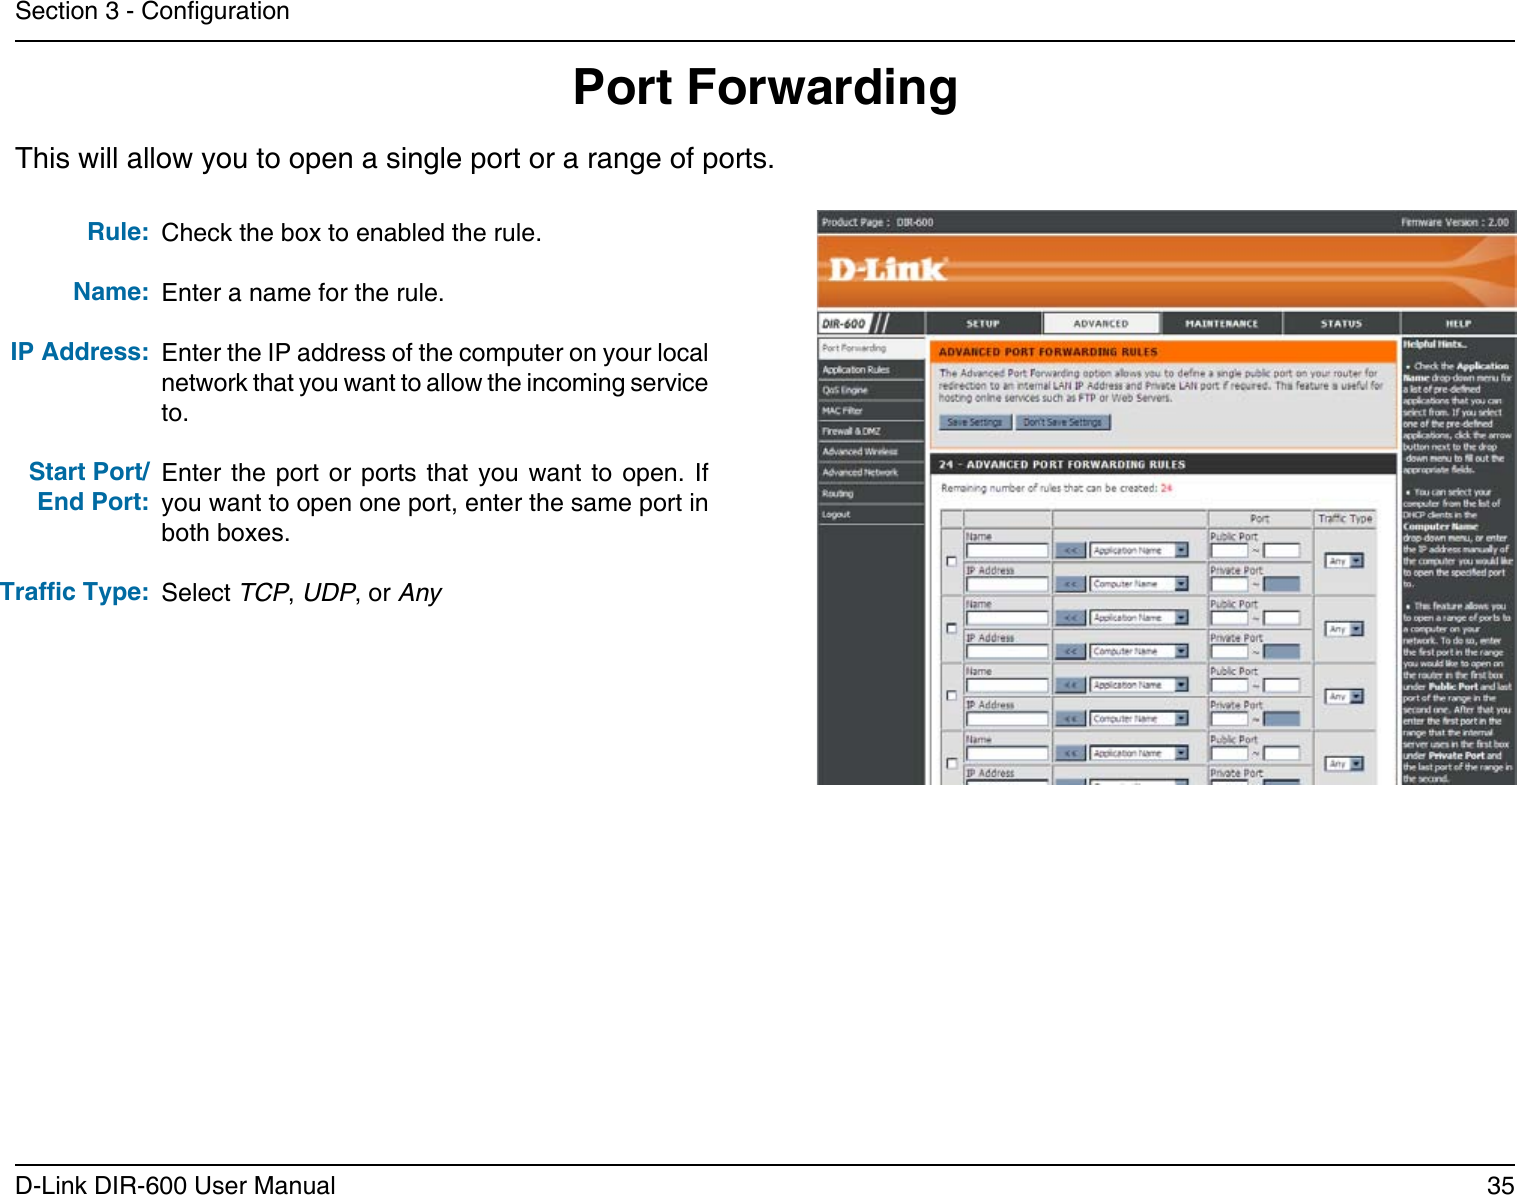 35D-Link DIR-600 User ManualSection 3 - CongurationPort ForwardingThis will allow you to open a single port or a range of ports.Check the box to enabled the rule. Enter a name for the rule.Enter the IP address of the computer on your local network that you want to allow the incoming service to.Enter  the  port or  ports that  you want  to open.  If you want to open one port, enter the same port in both boxes.Select TCP, UDP, or AnyRule:Name:IP Address:Start Port/End Port:Trafc Type: